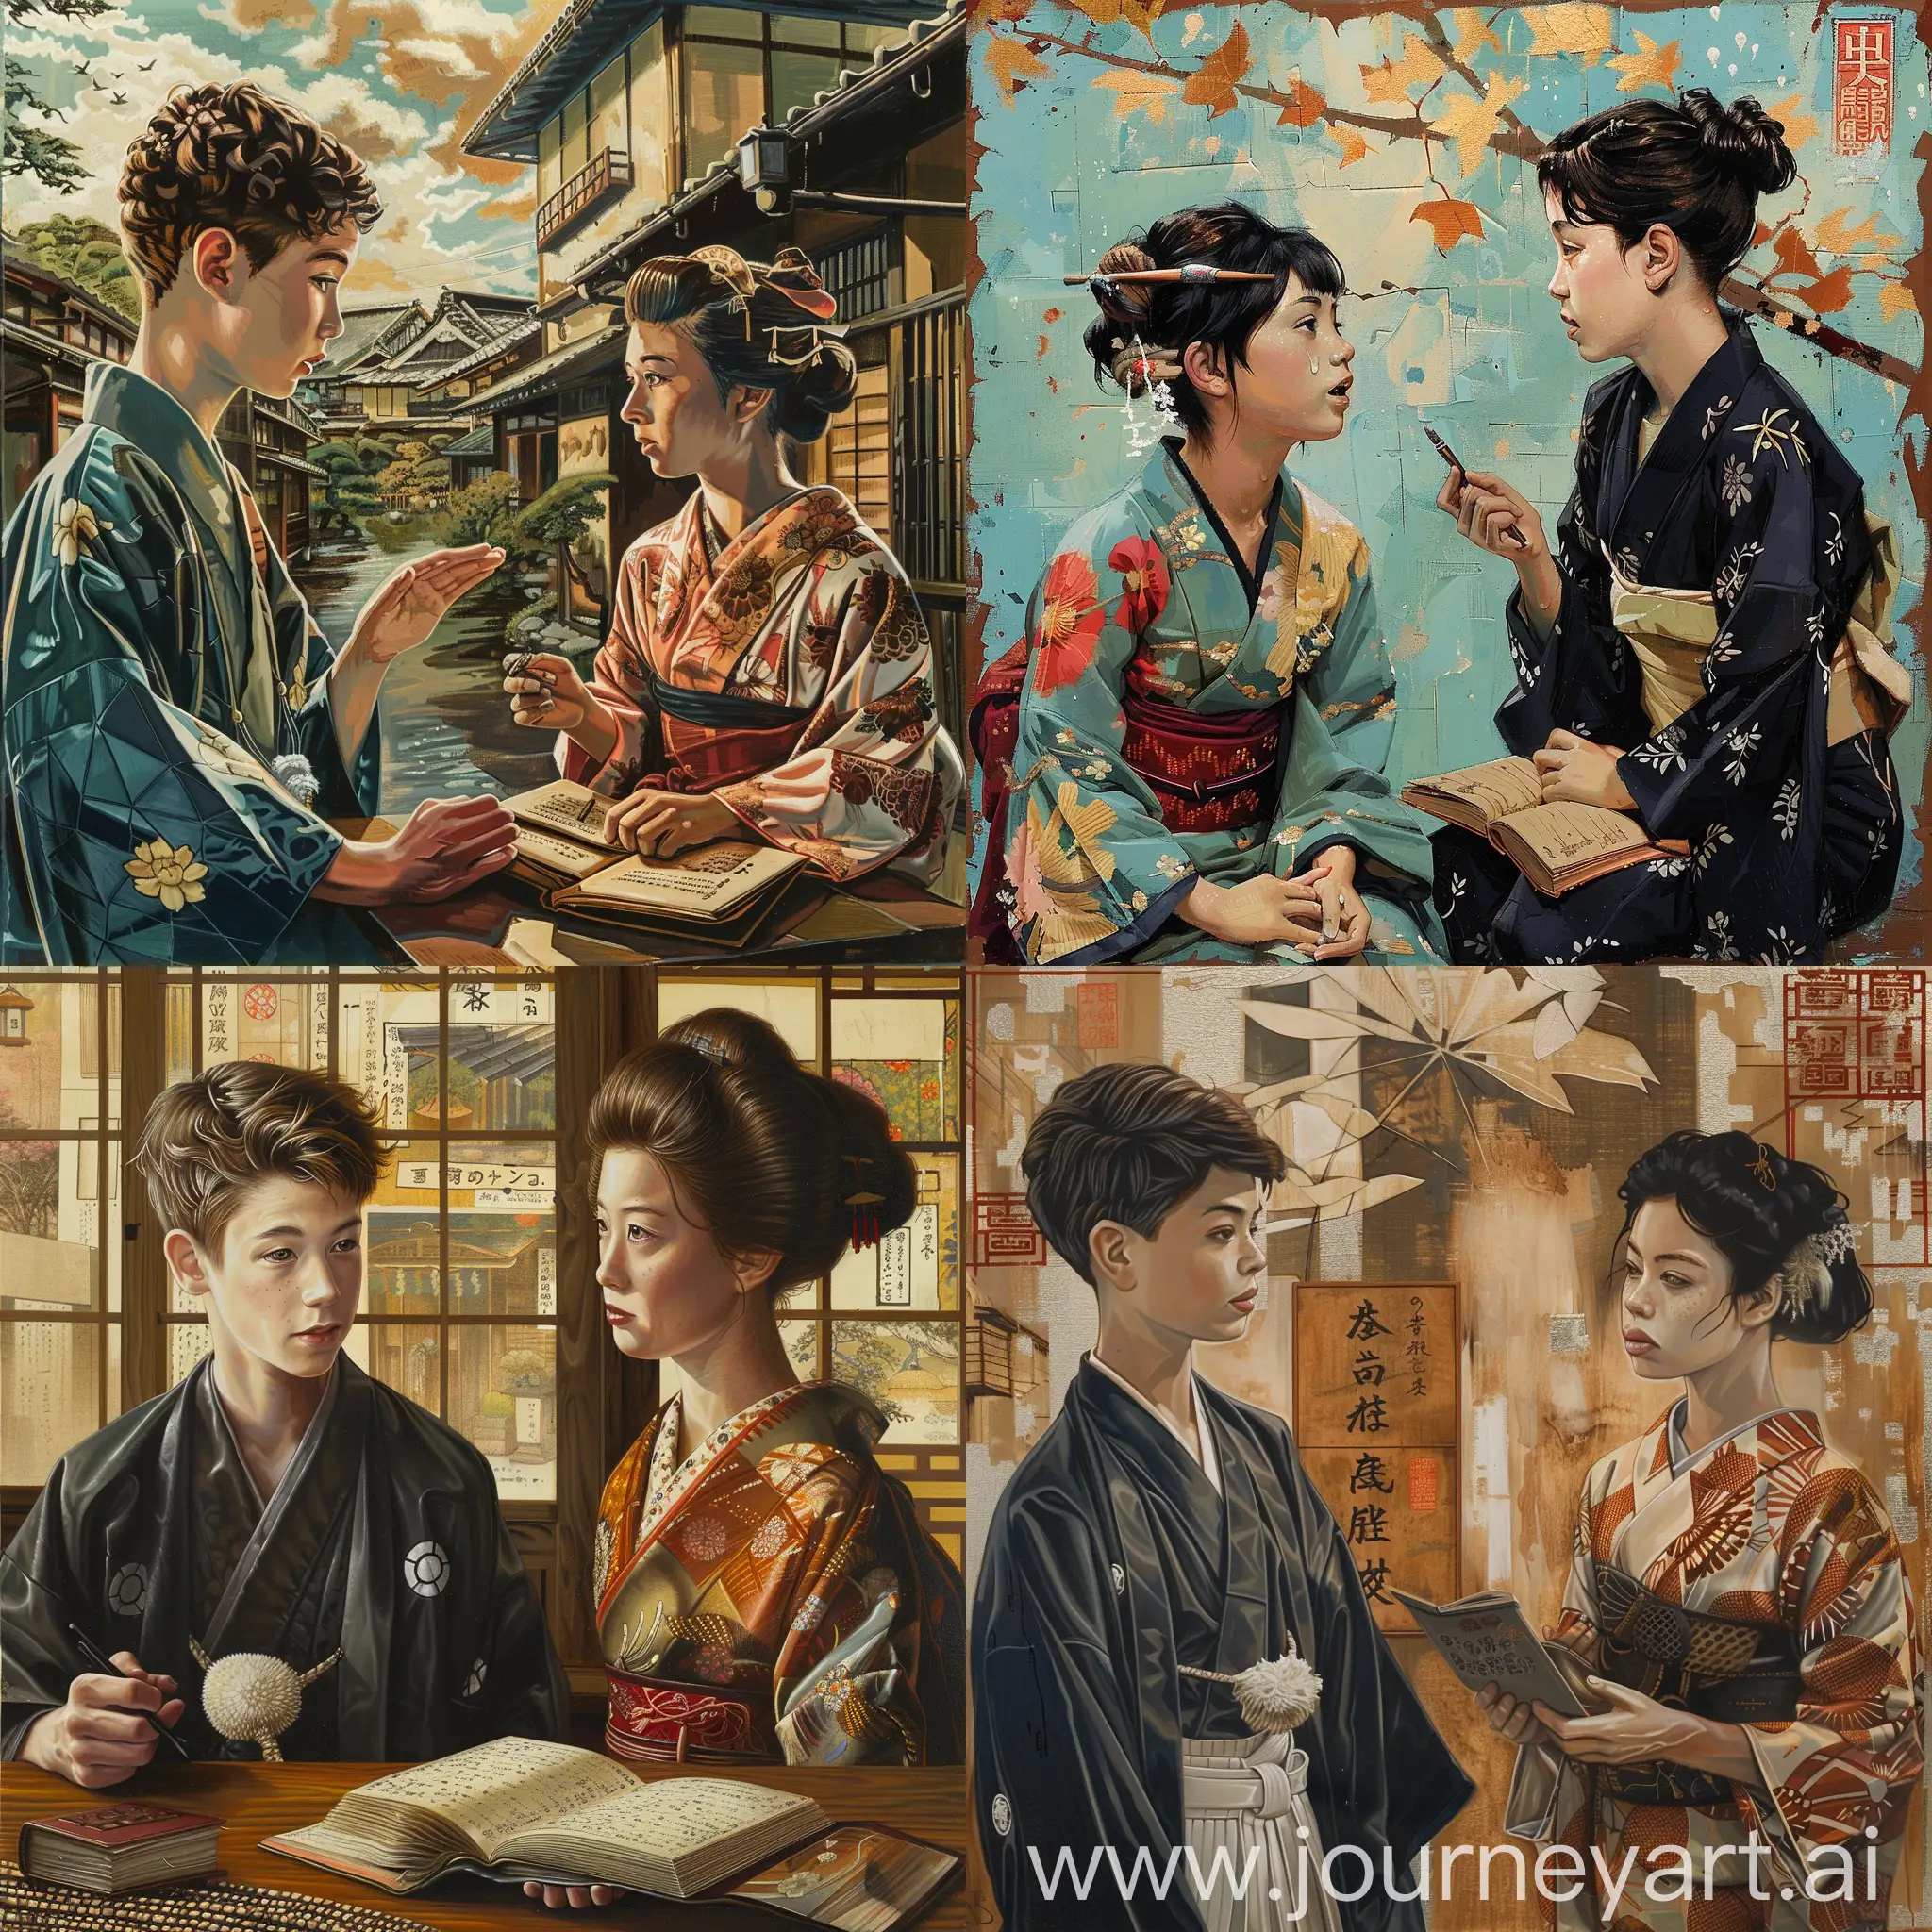 Japanese-18YearOld-Boy-and-Servant-Woman-in-Kimono-Overcoming-Language-Barrier-Reflections-of-Perseverance-and-Learning-in-an-East-Village-Art-Scene